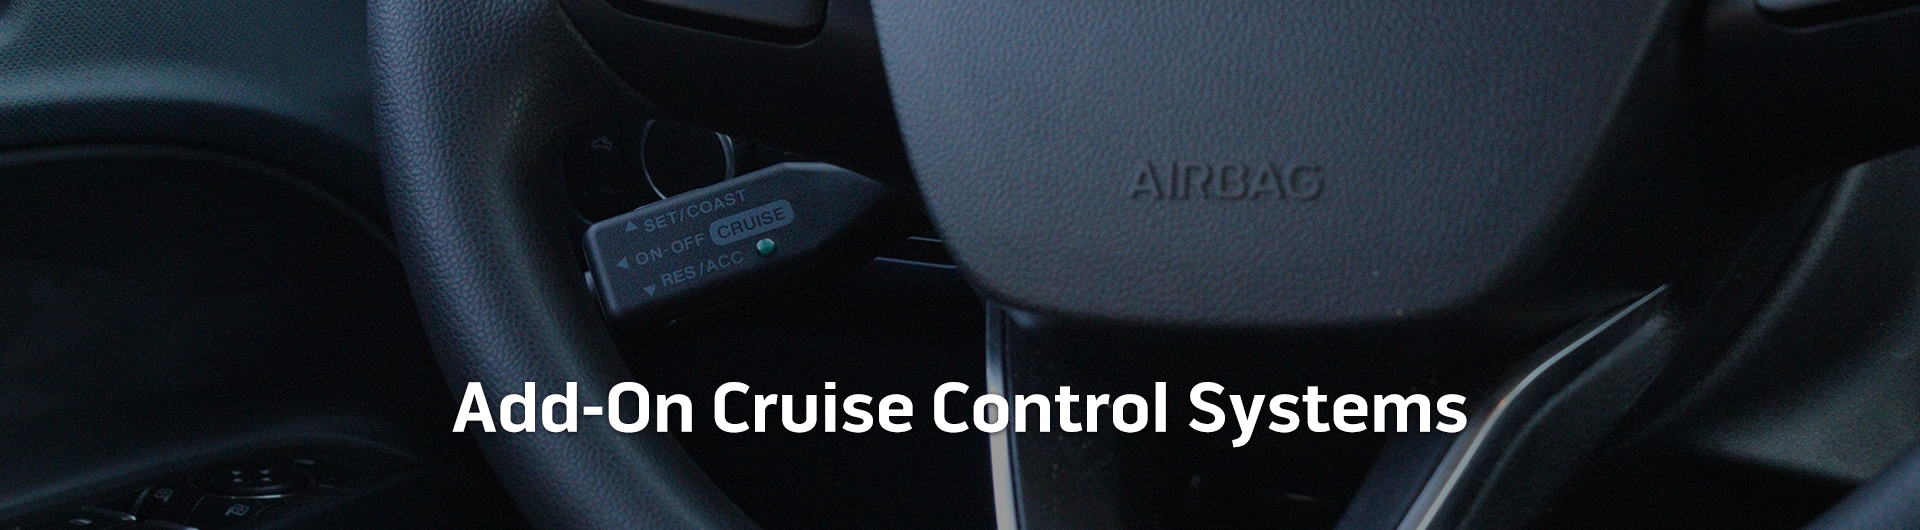 An image showing a cruise control switch installed on a vehicle. The image has text that reads Add-On Cruise Control Systems